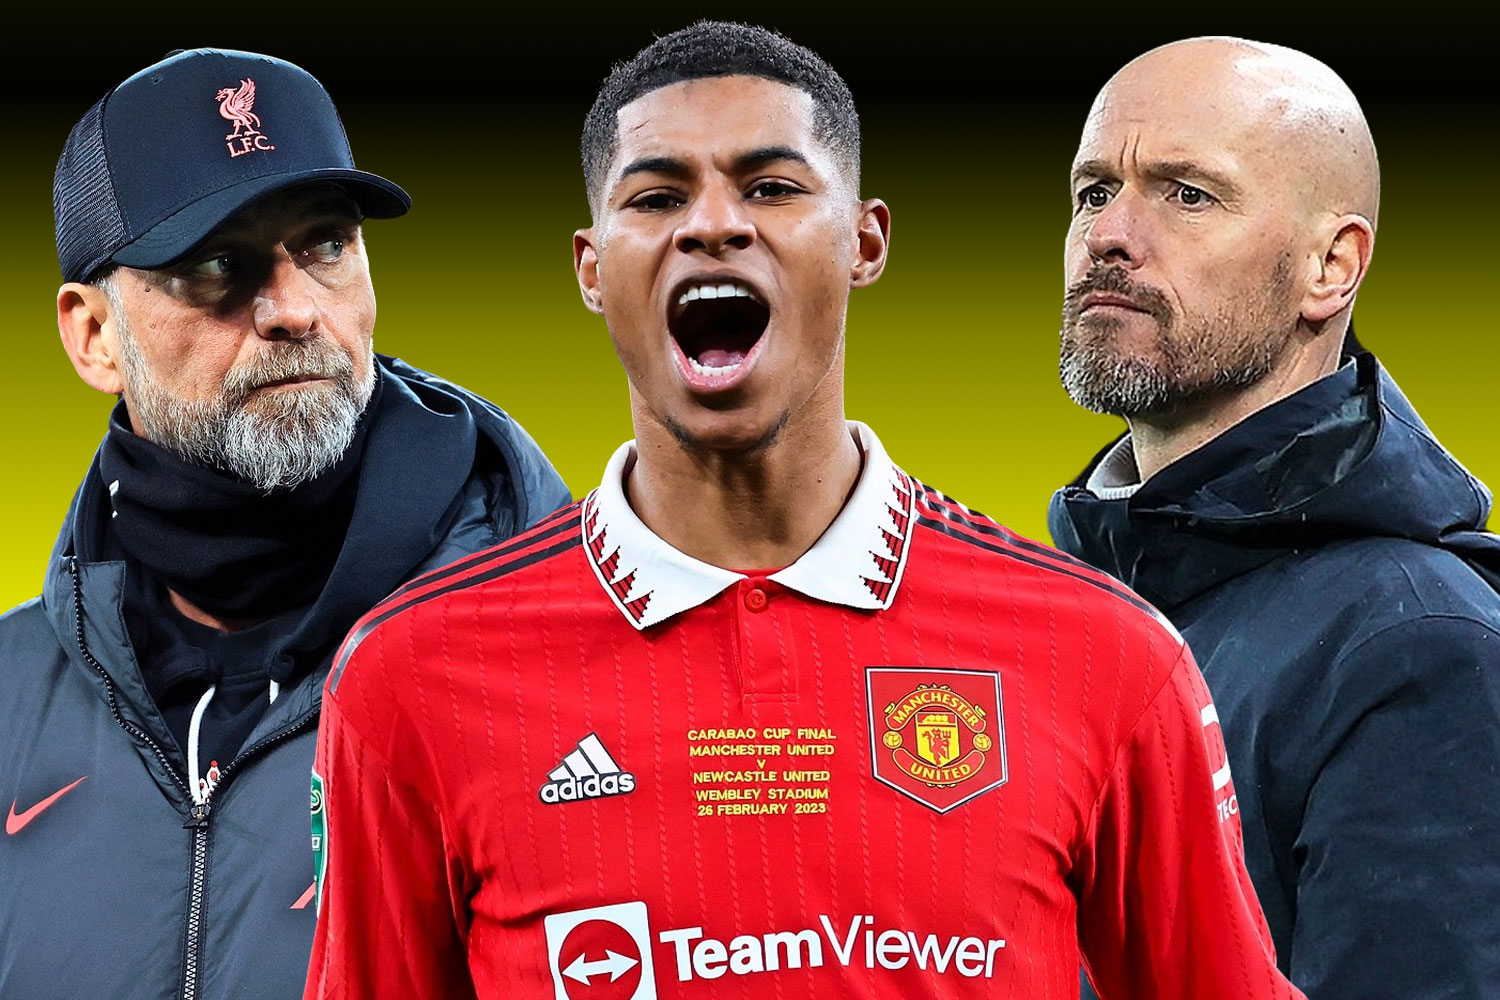 Huge clash between rivals underway as Reds look to continue top four charge while visitors and in-form Rashford aim to end Anfield curse